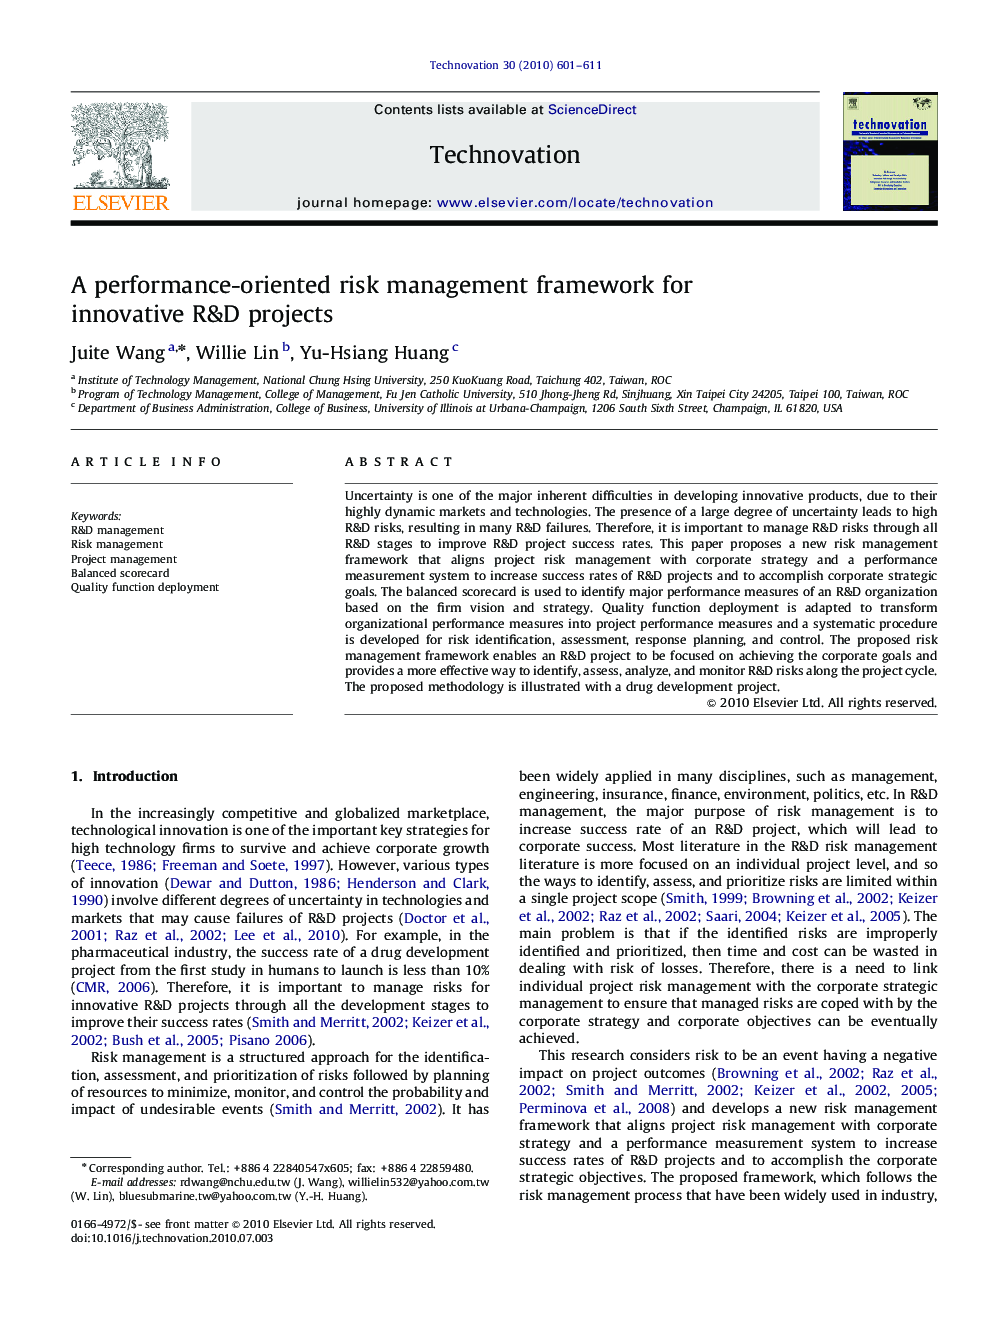 A performance-oriented risk management framework for innovative R&D projects